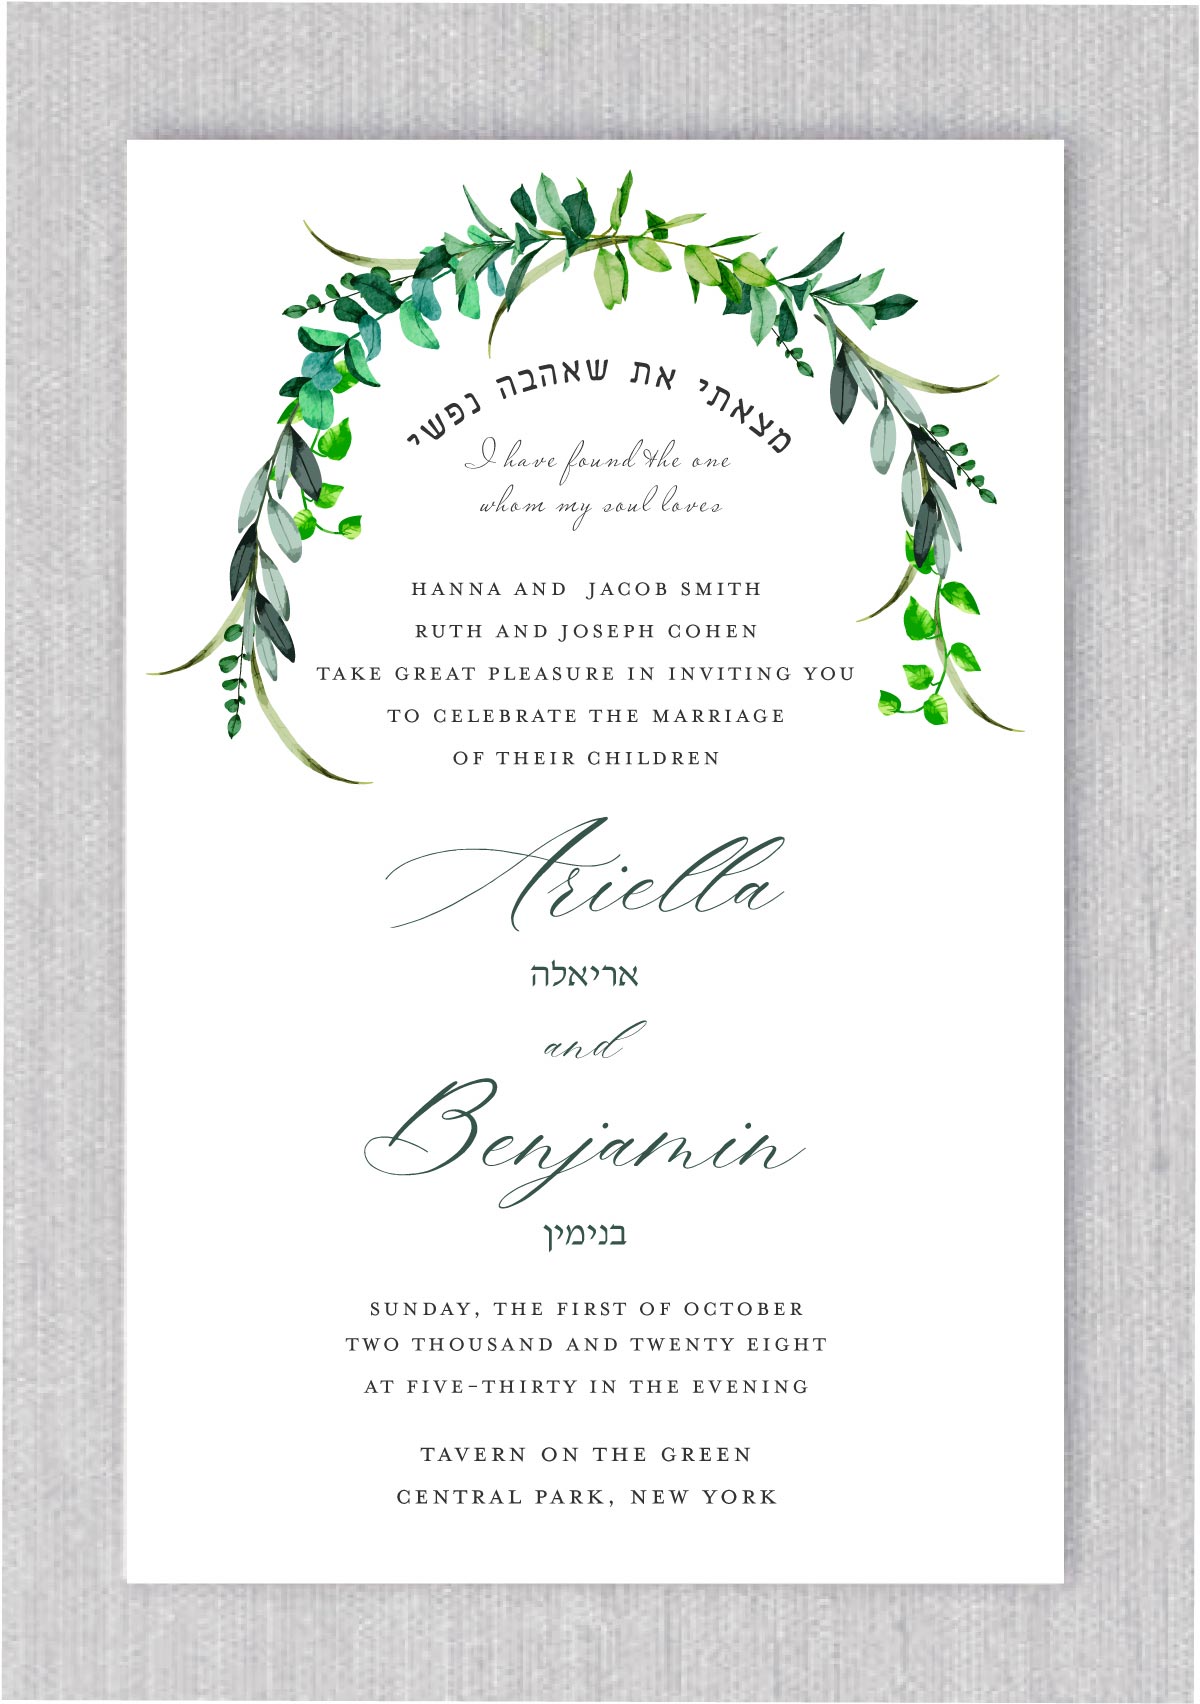 Green Watercolor Leaves - Jewish Wedding Invitation is a perfect blend of modernity and tradition. The invitation features a beautifully hand-drawn watercolor leaves  greenery leaves adorning the sides of the wedding invitation. The text "I found the whom my soul loves" is arch designed in both Hebrew and English, showcasing the essence of a Jewish wedding. The unique watercolor effect used in the design adds a touch of artistic flair, giving the invitation a refreshing and contemporary feel. The layout of the invitation is modern and clean, making it easy to read and understand all the important details of your special day. With this invitation, you can invite your guests to your wedding in style, and let them know that they are in for a beautiful and unforgettable celebration.